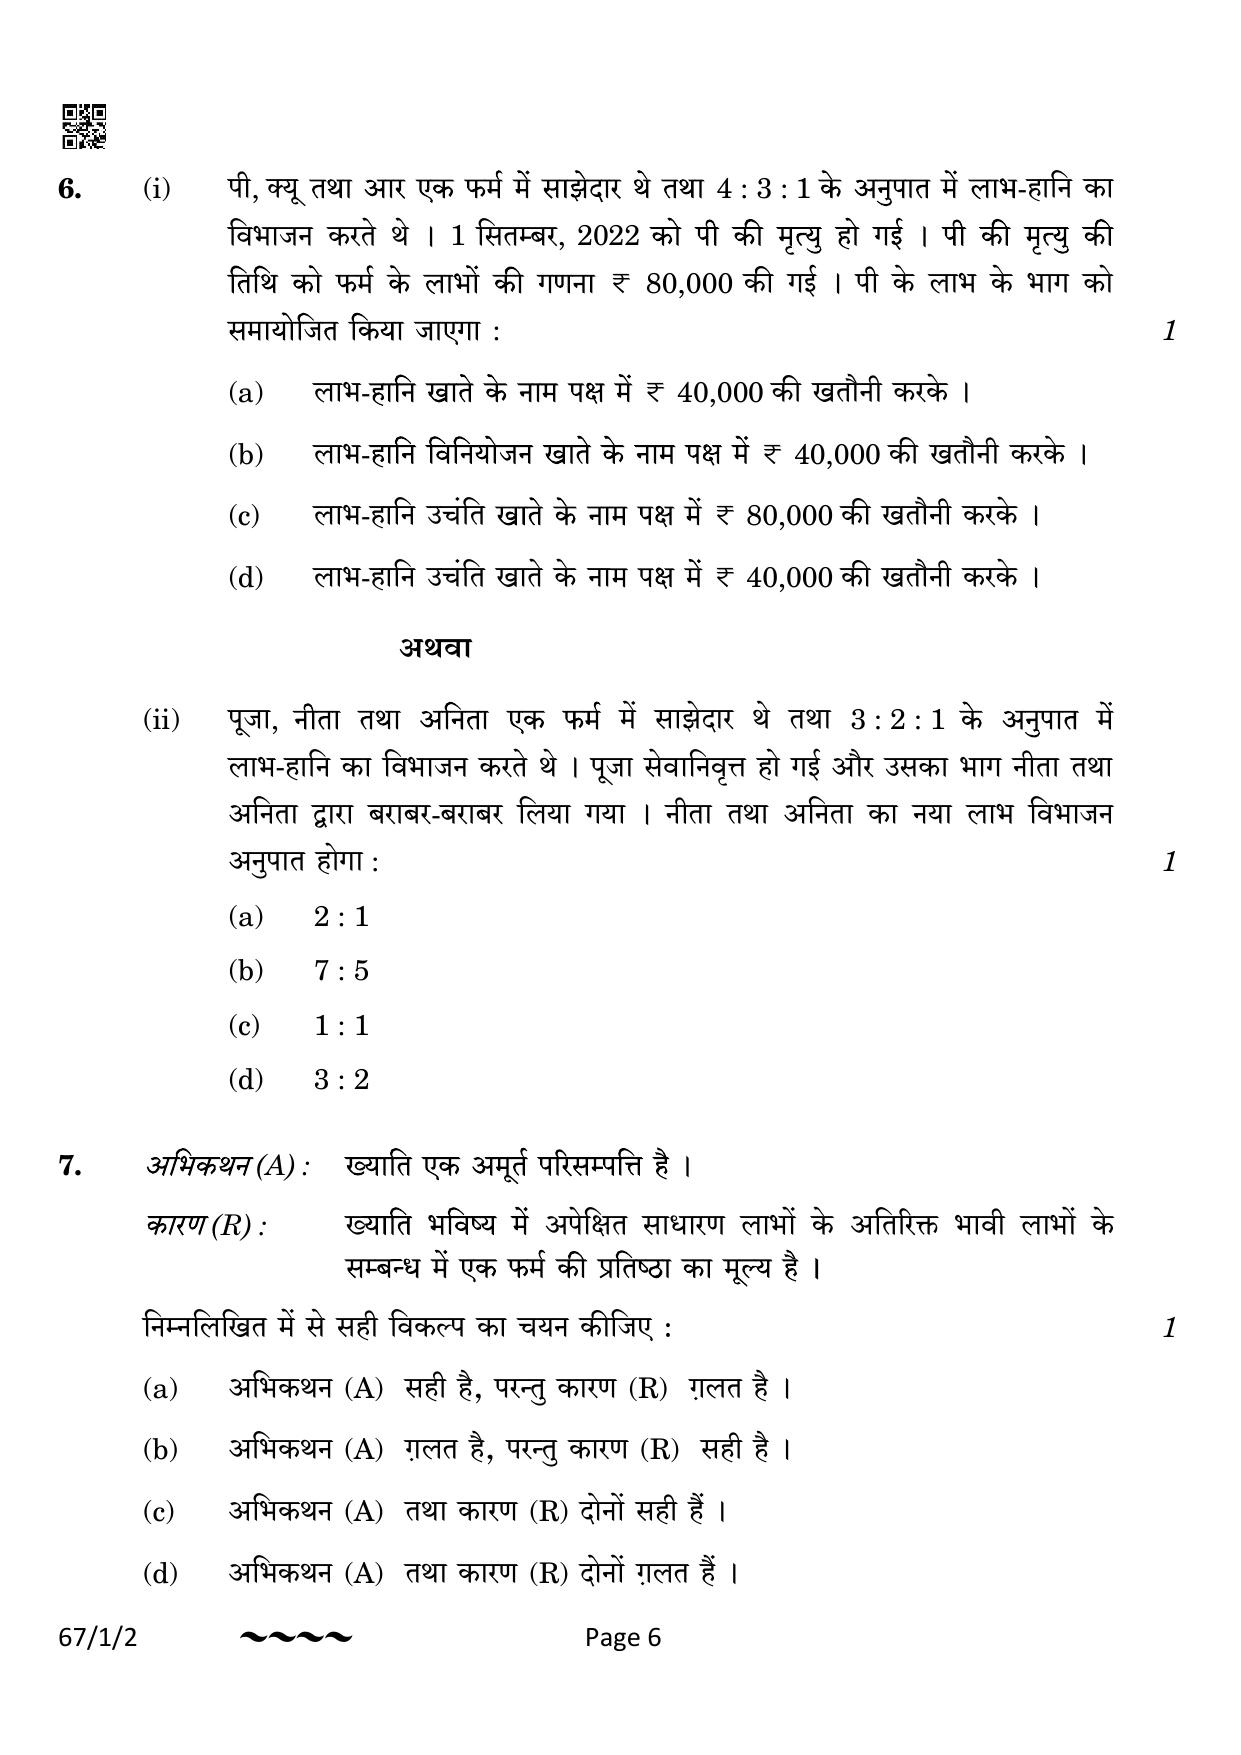 CBSE Class 12 67-1-2 Accountancy 2023 Question Paper - Page 6